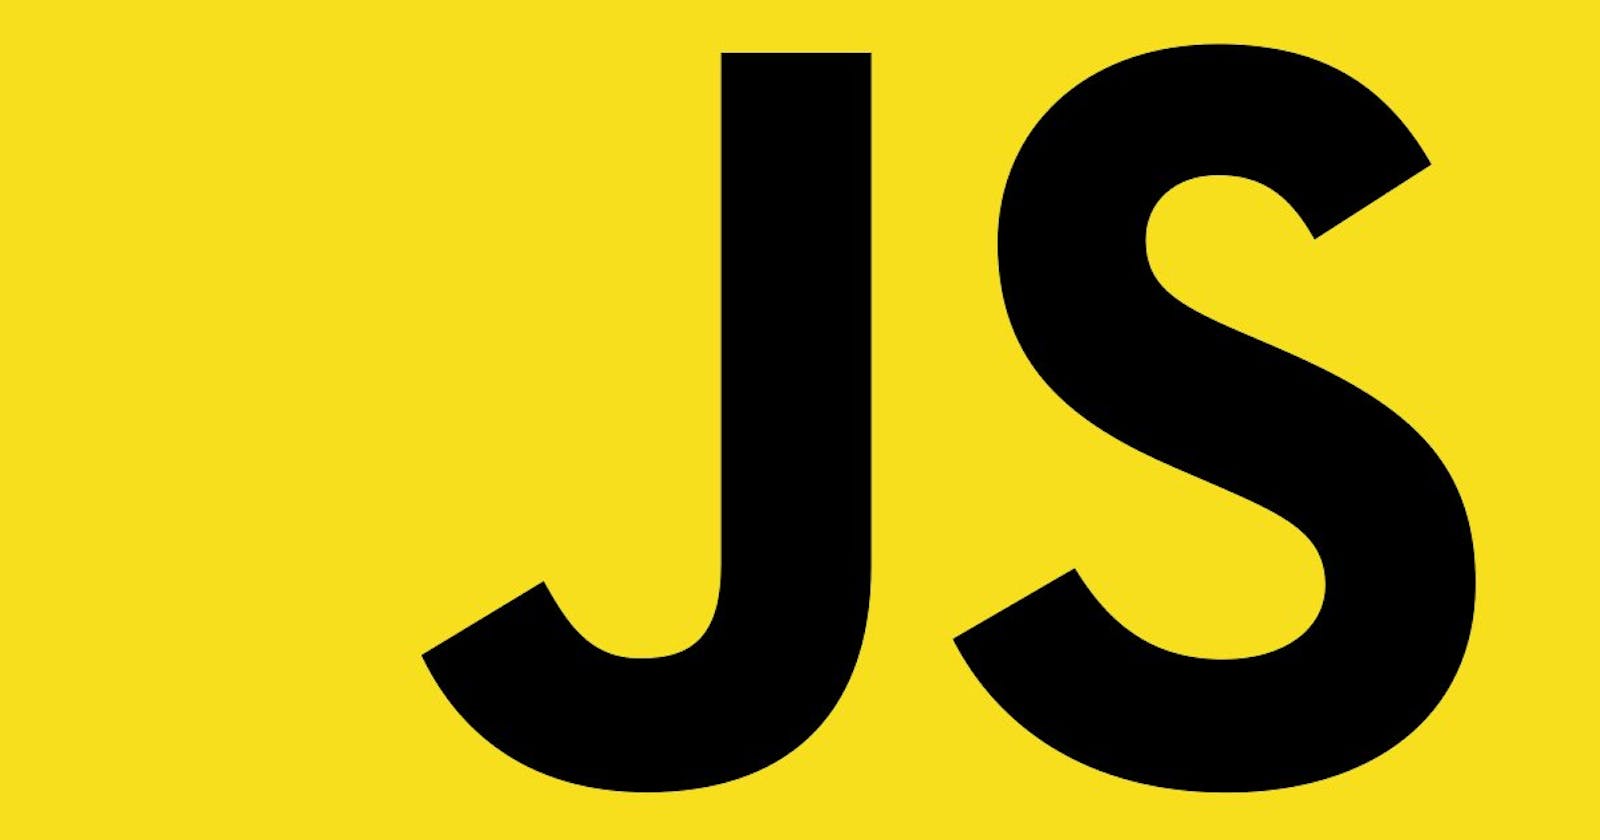 How to select HTML elements using JavaScript